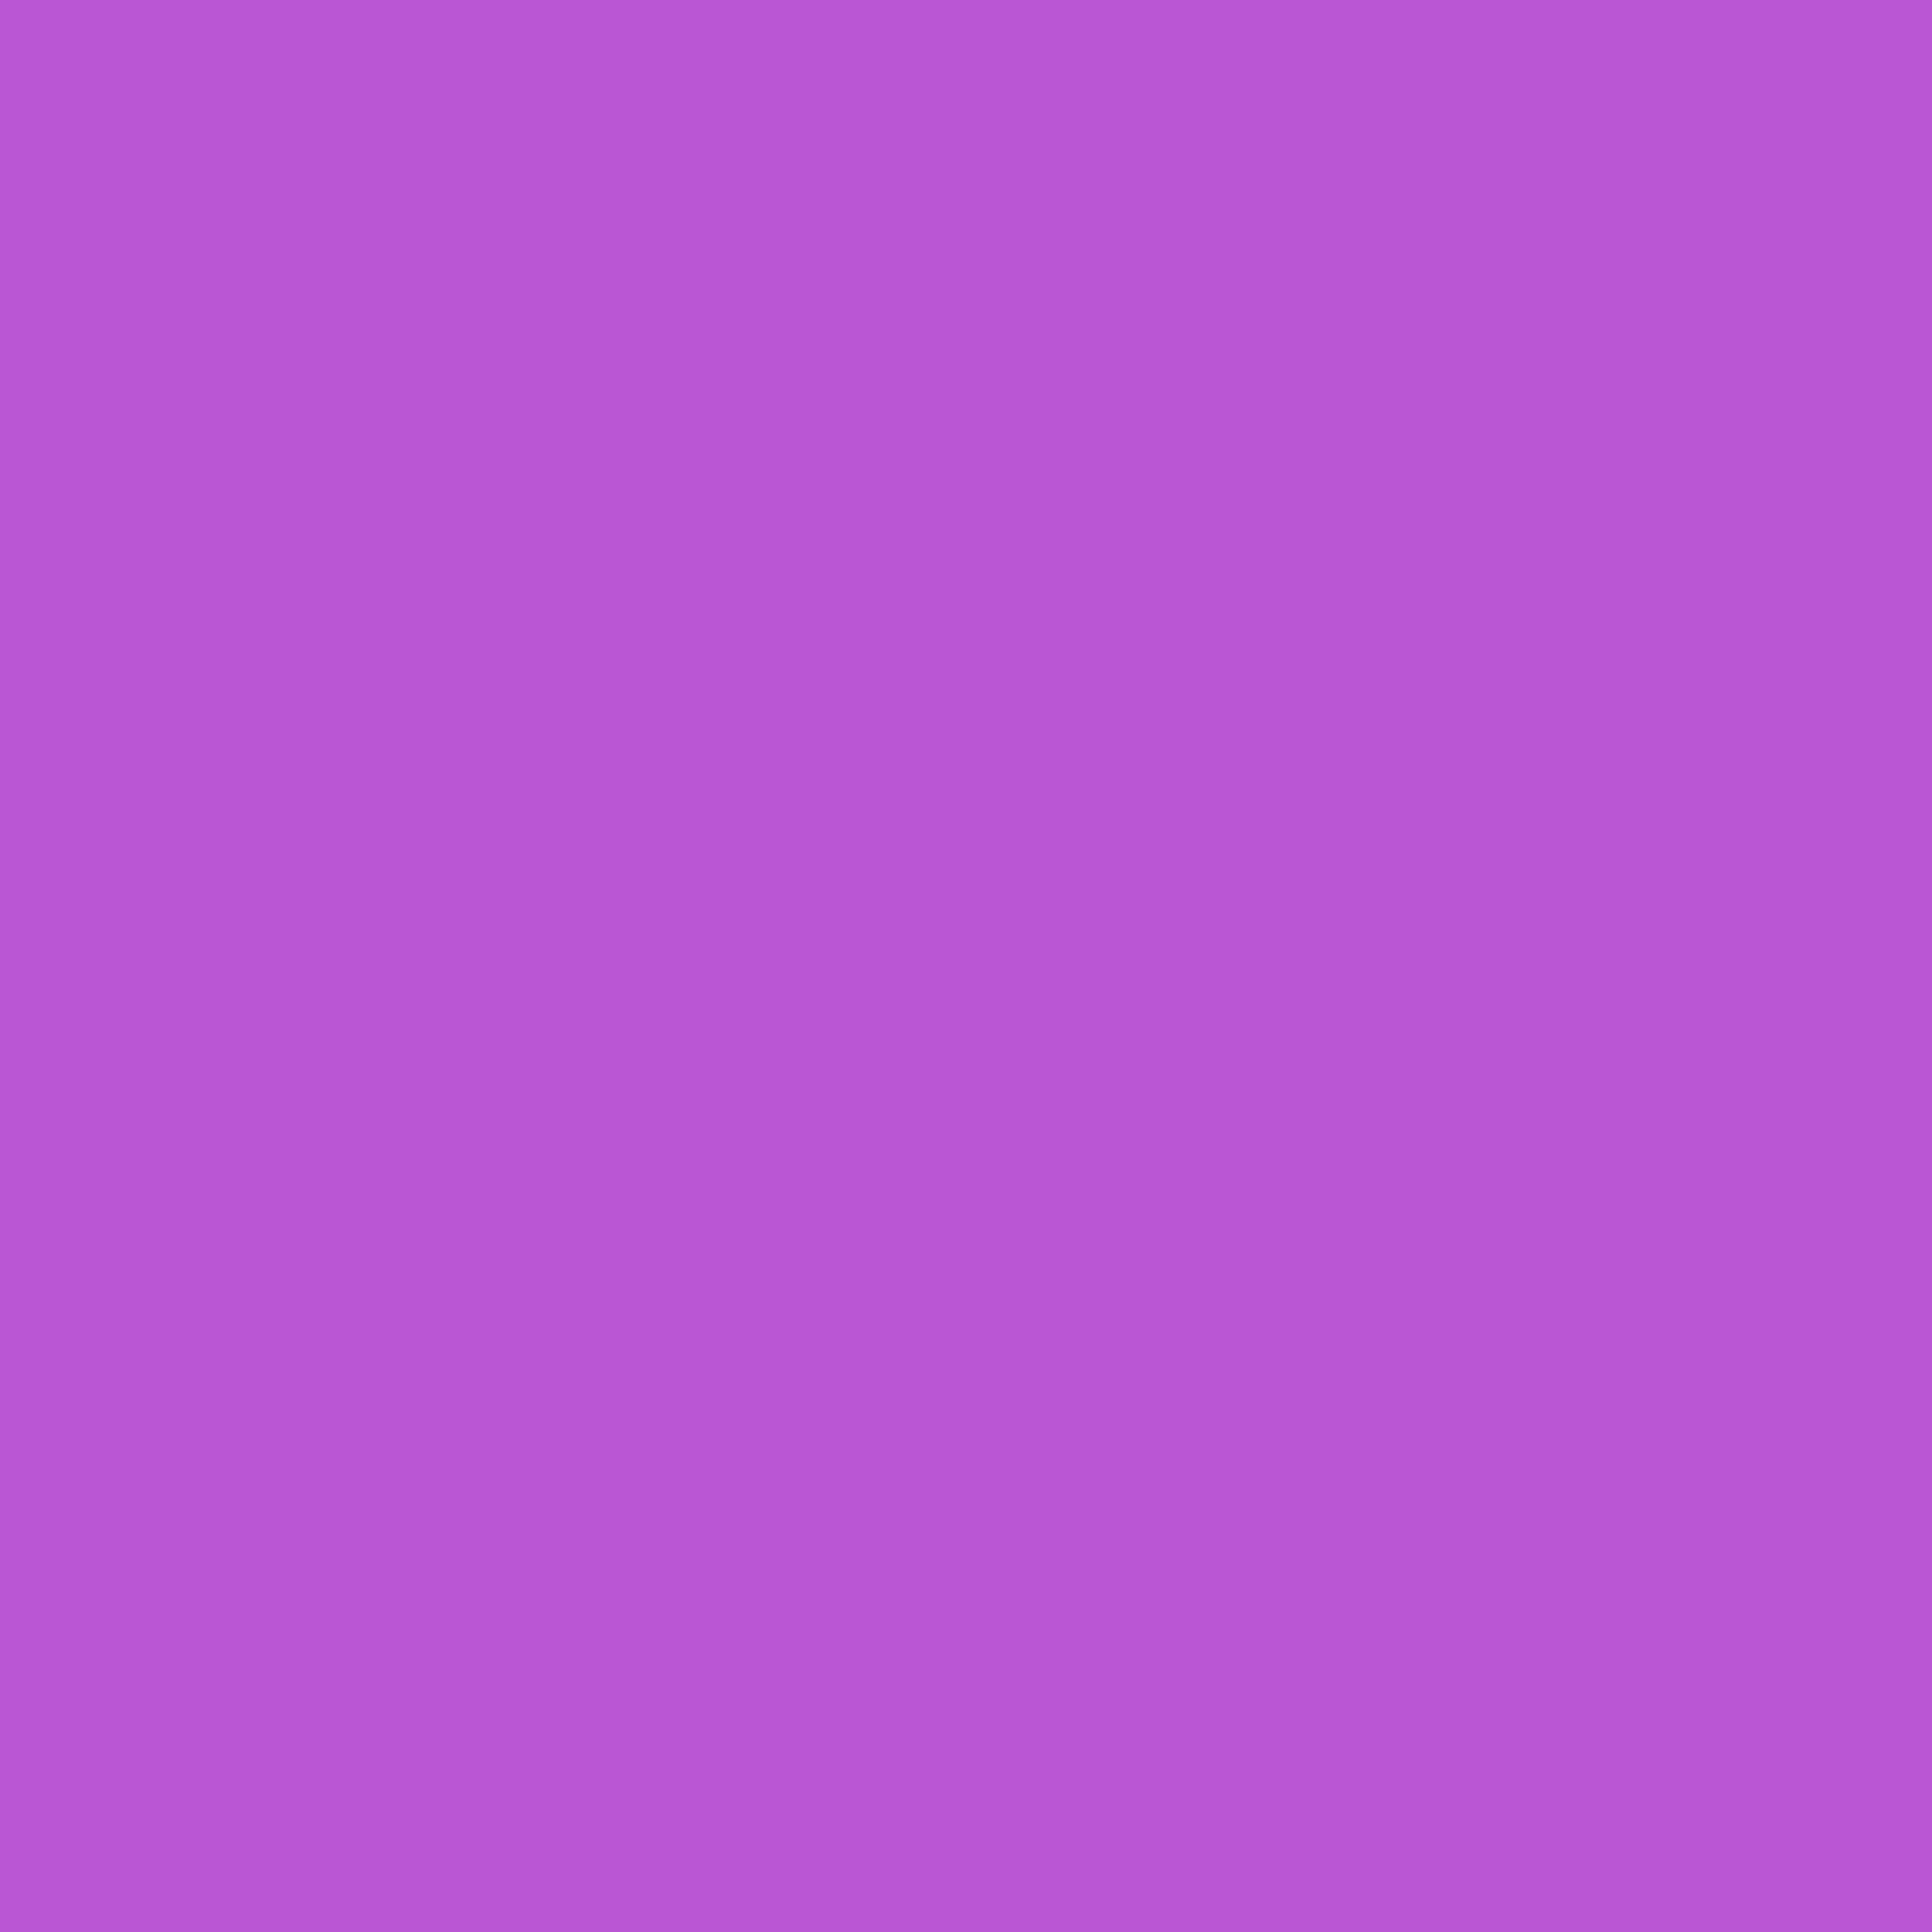 2732x2732 Medium Orchid Solid Color Background